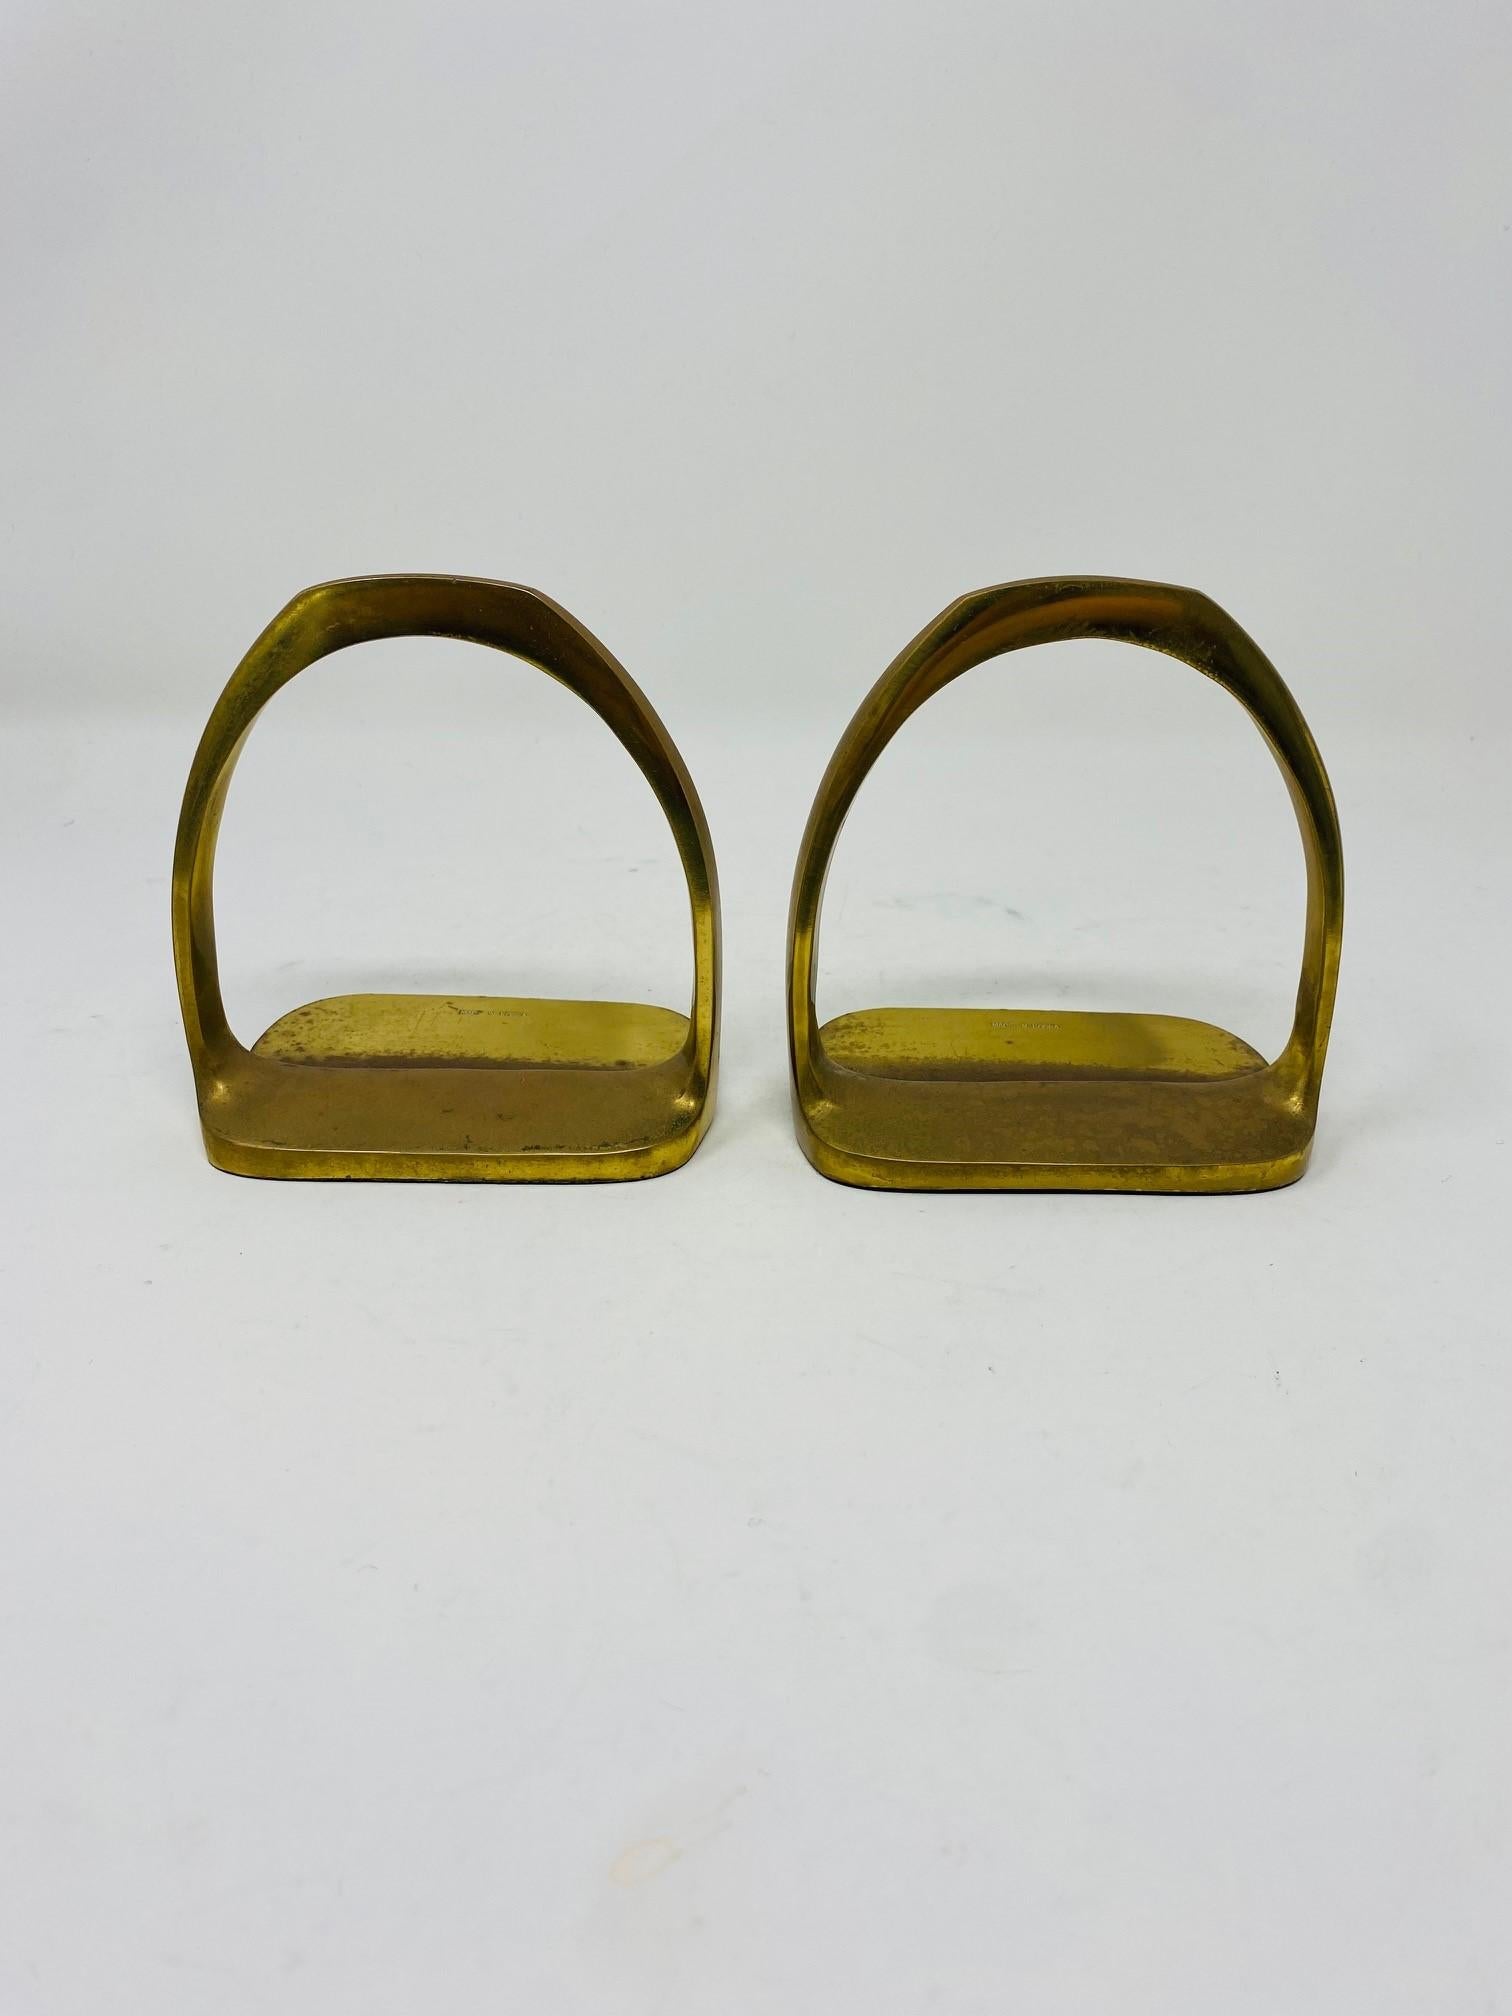 Vintage Pair of Brass Hermes Style Horse Saddle Stirrup Bookends For Sale 3